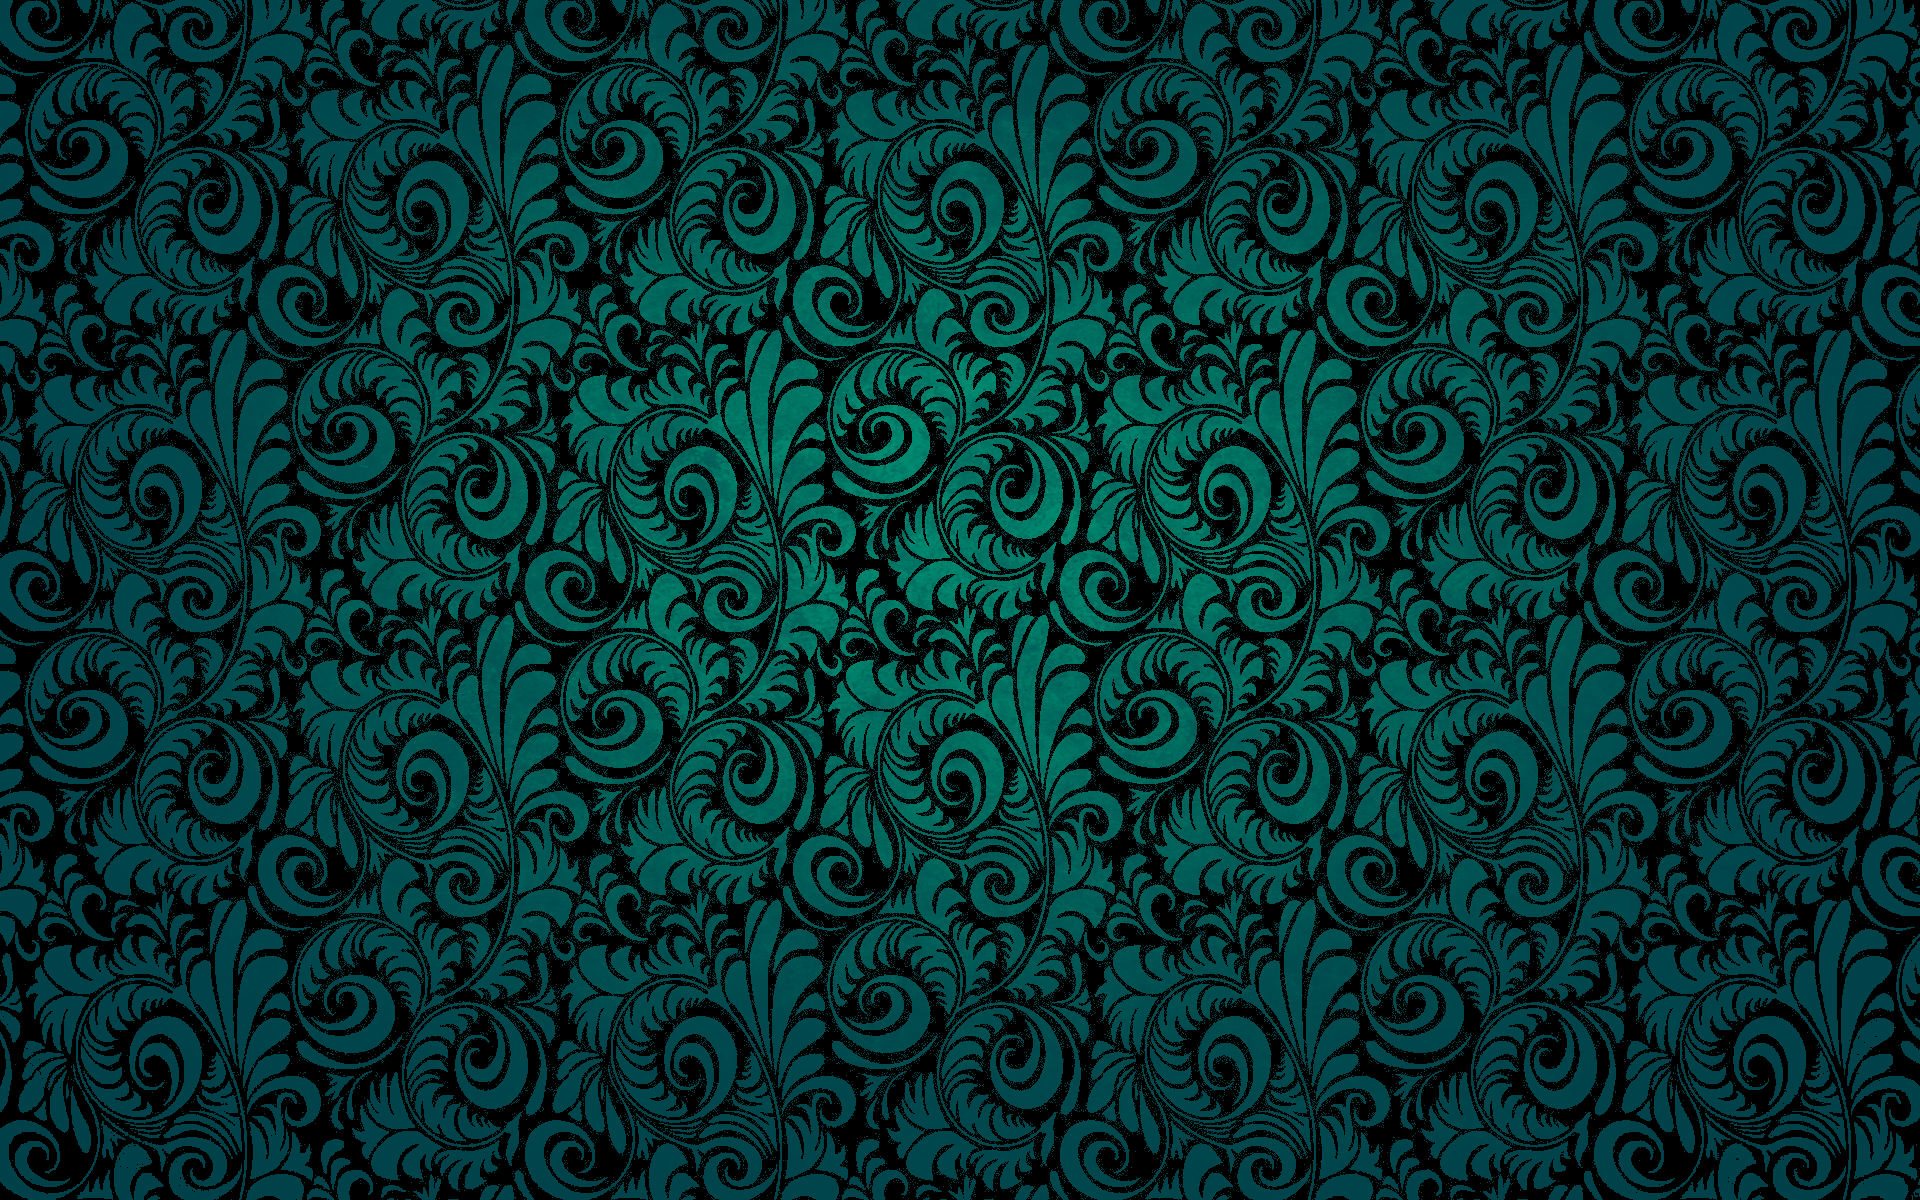 black-floral-texture-pattern-design-wallpaper-background1 | Arts by ...